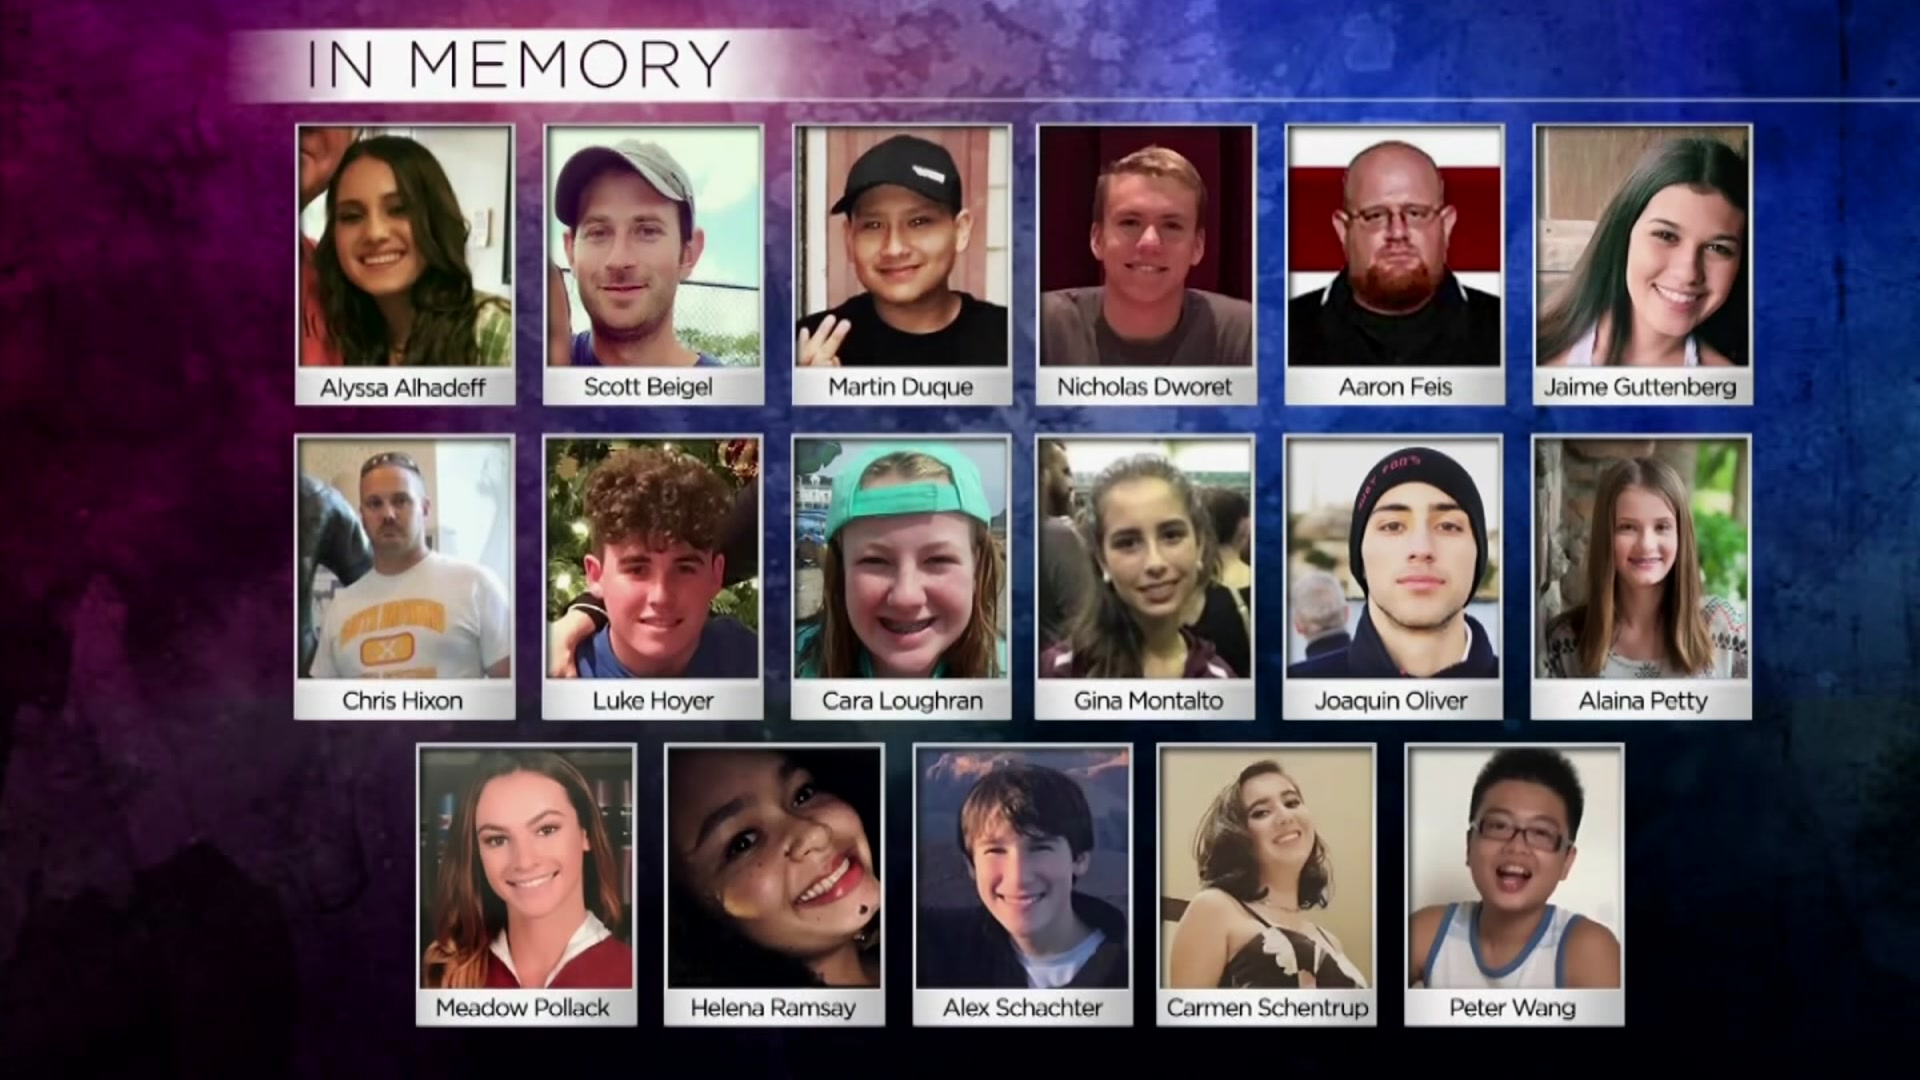 '17 Days Of Celebration' Honors Victims Of Parkland School Shooting ...